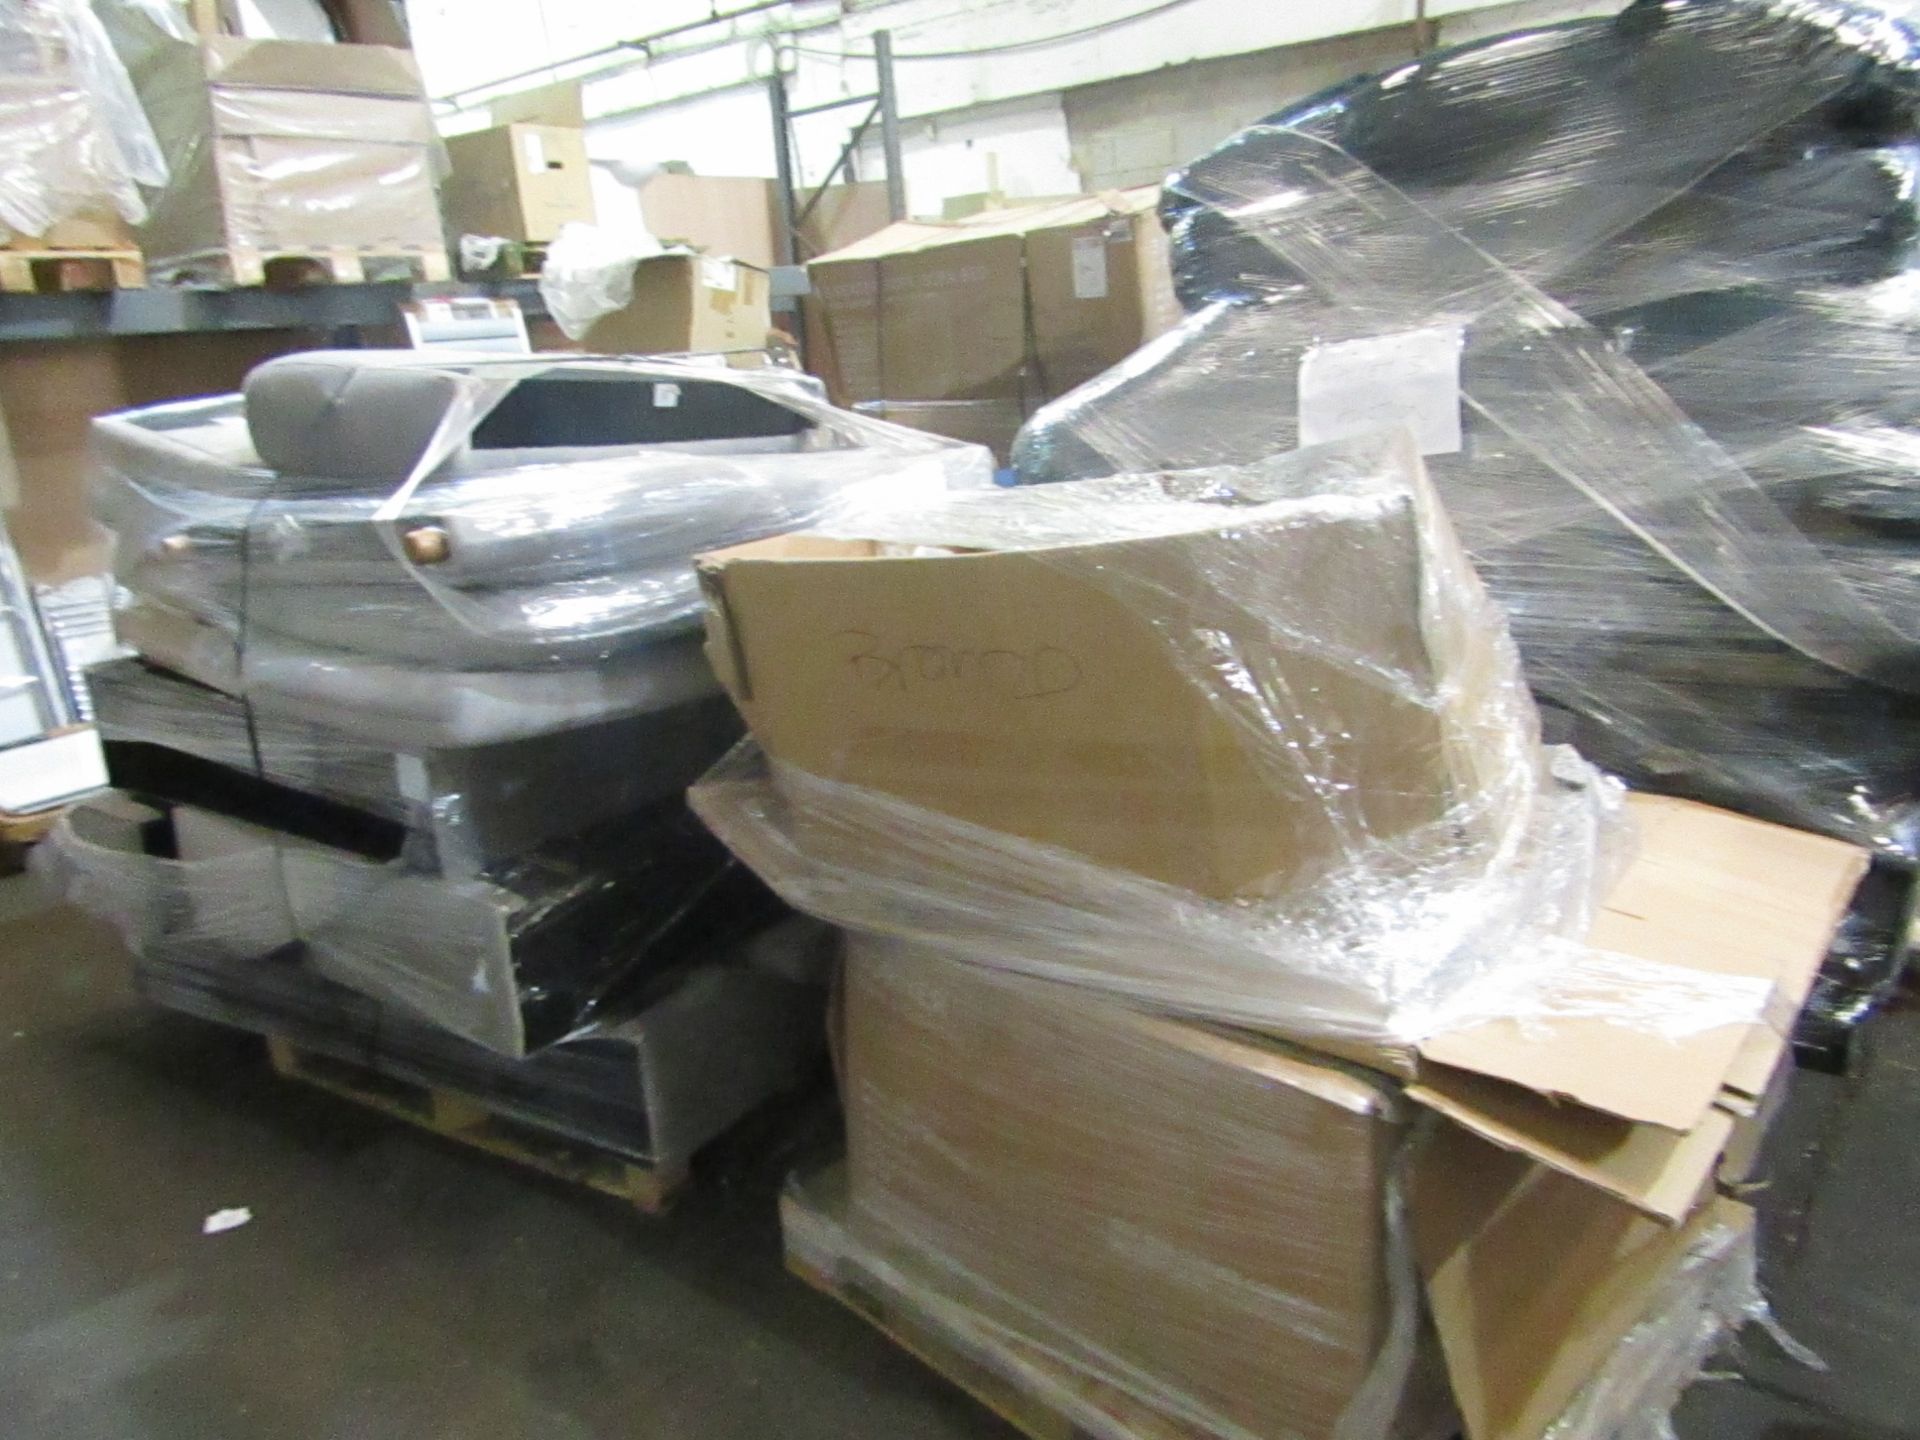 10% Buyers Premium +VAT, 24 Pallets of Genuine SNUG SOFA parts - Mixed Lots of Bases Backs Arms - Image 16 of 20